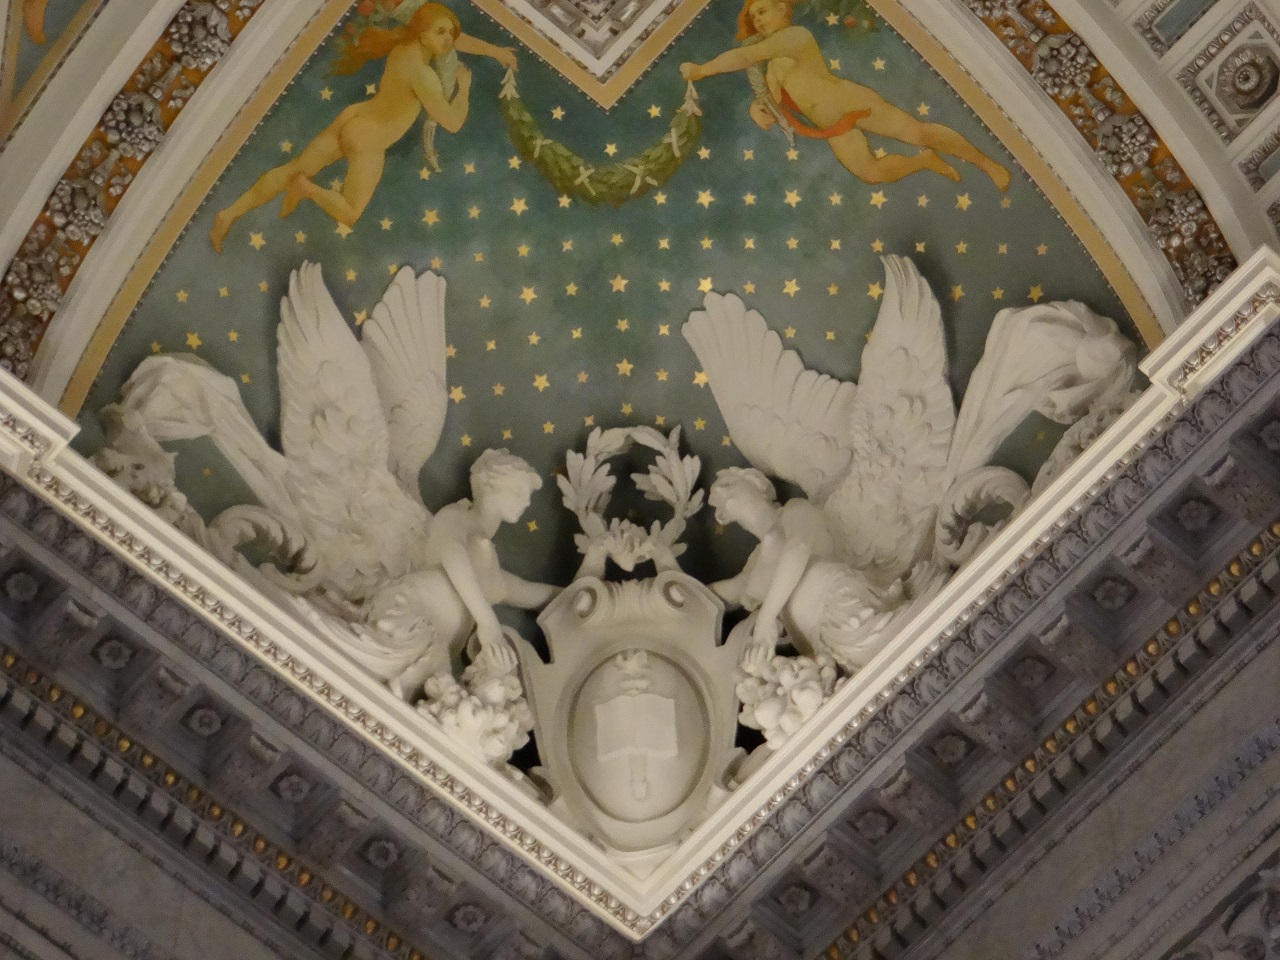 Ceiling Architecture Details Corner Library of Congress